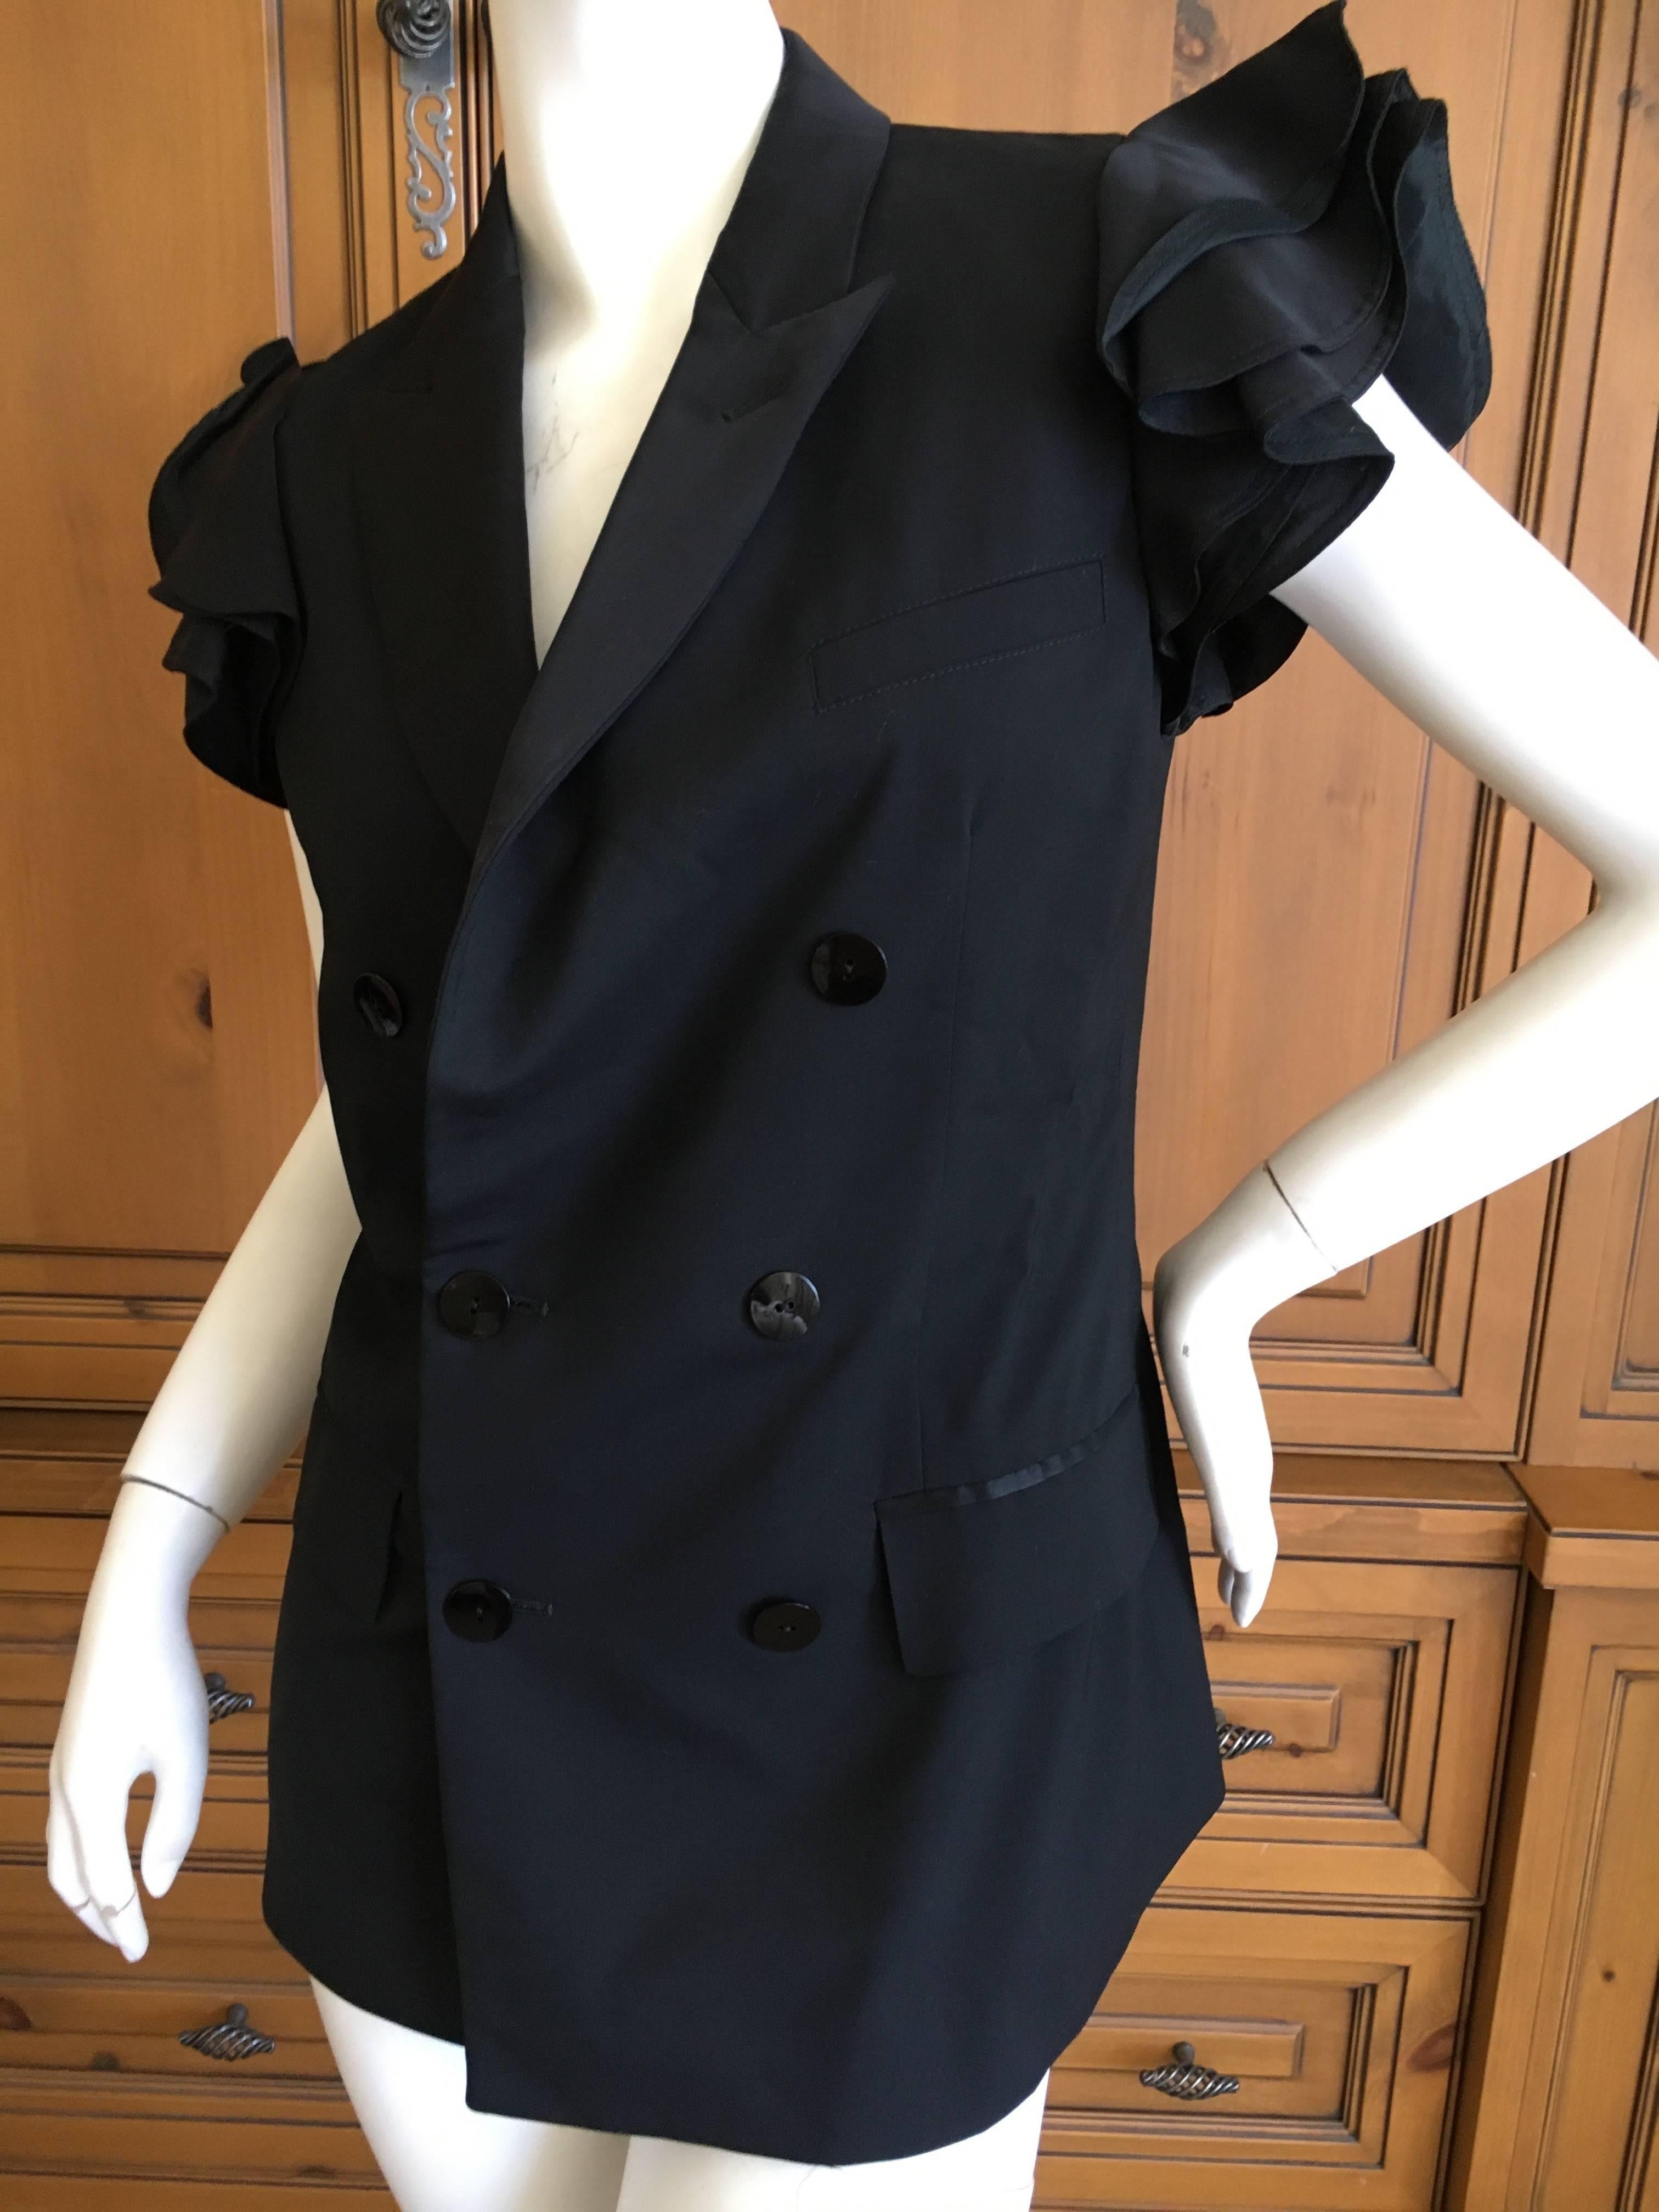 Jean Paul Gaultier Vintage Black Sleeveless Double Breasted Jacket with Ruffles For Sale 1